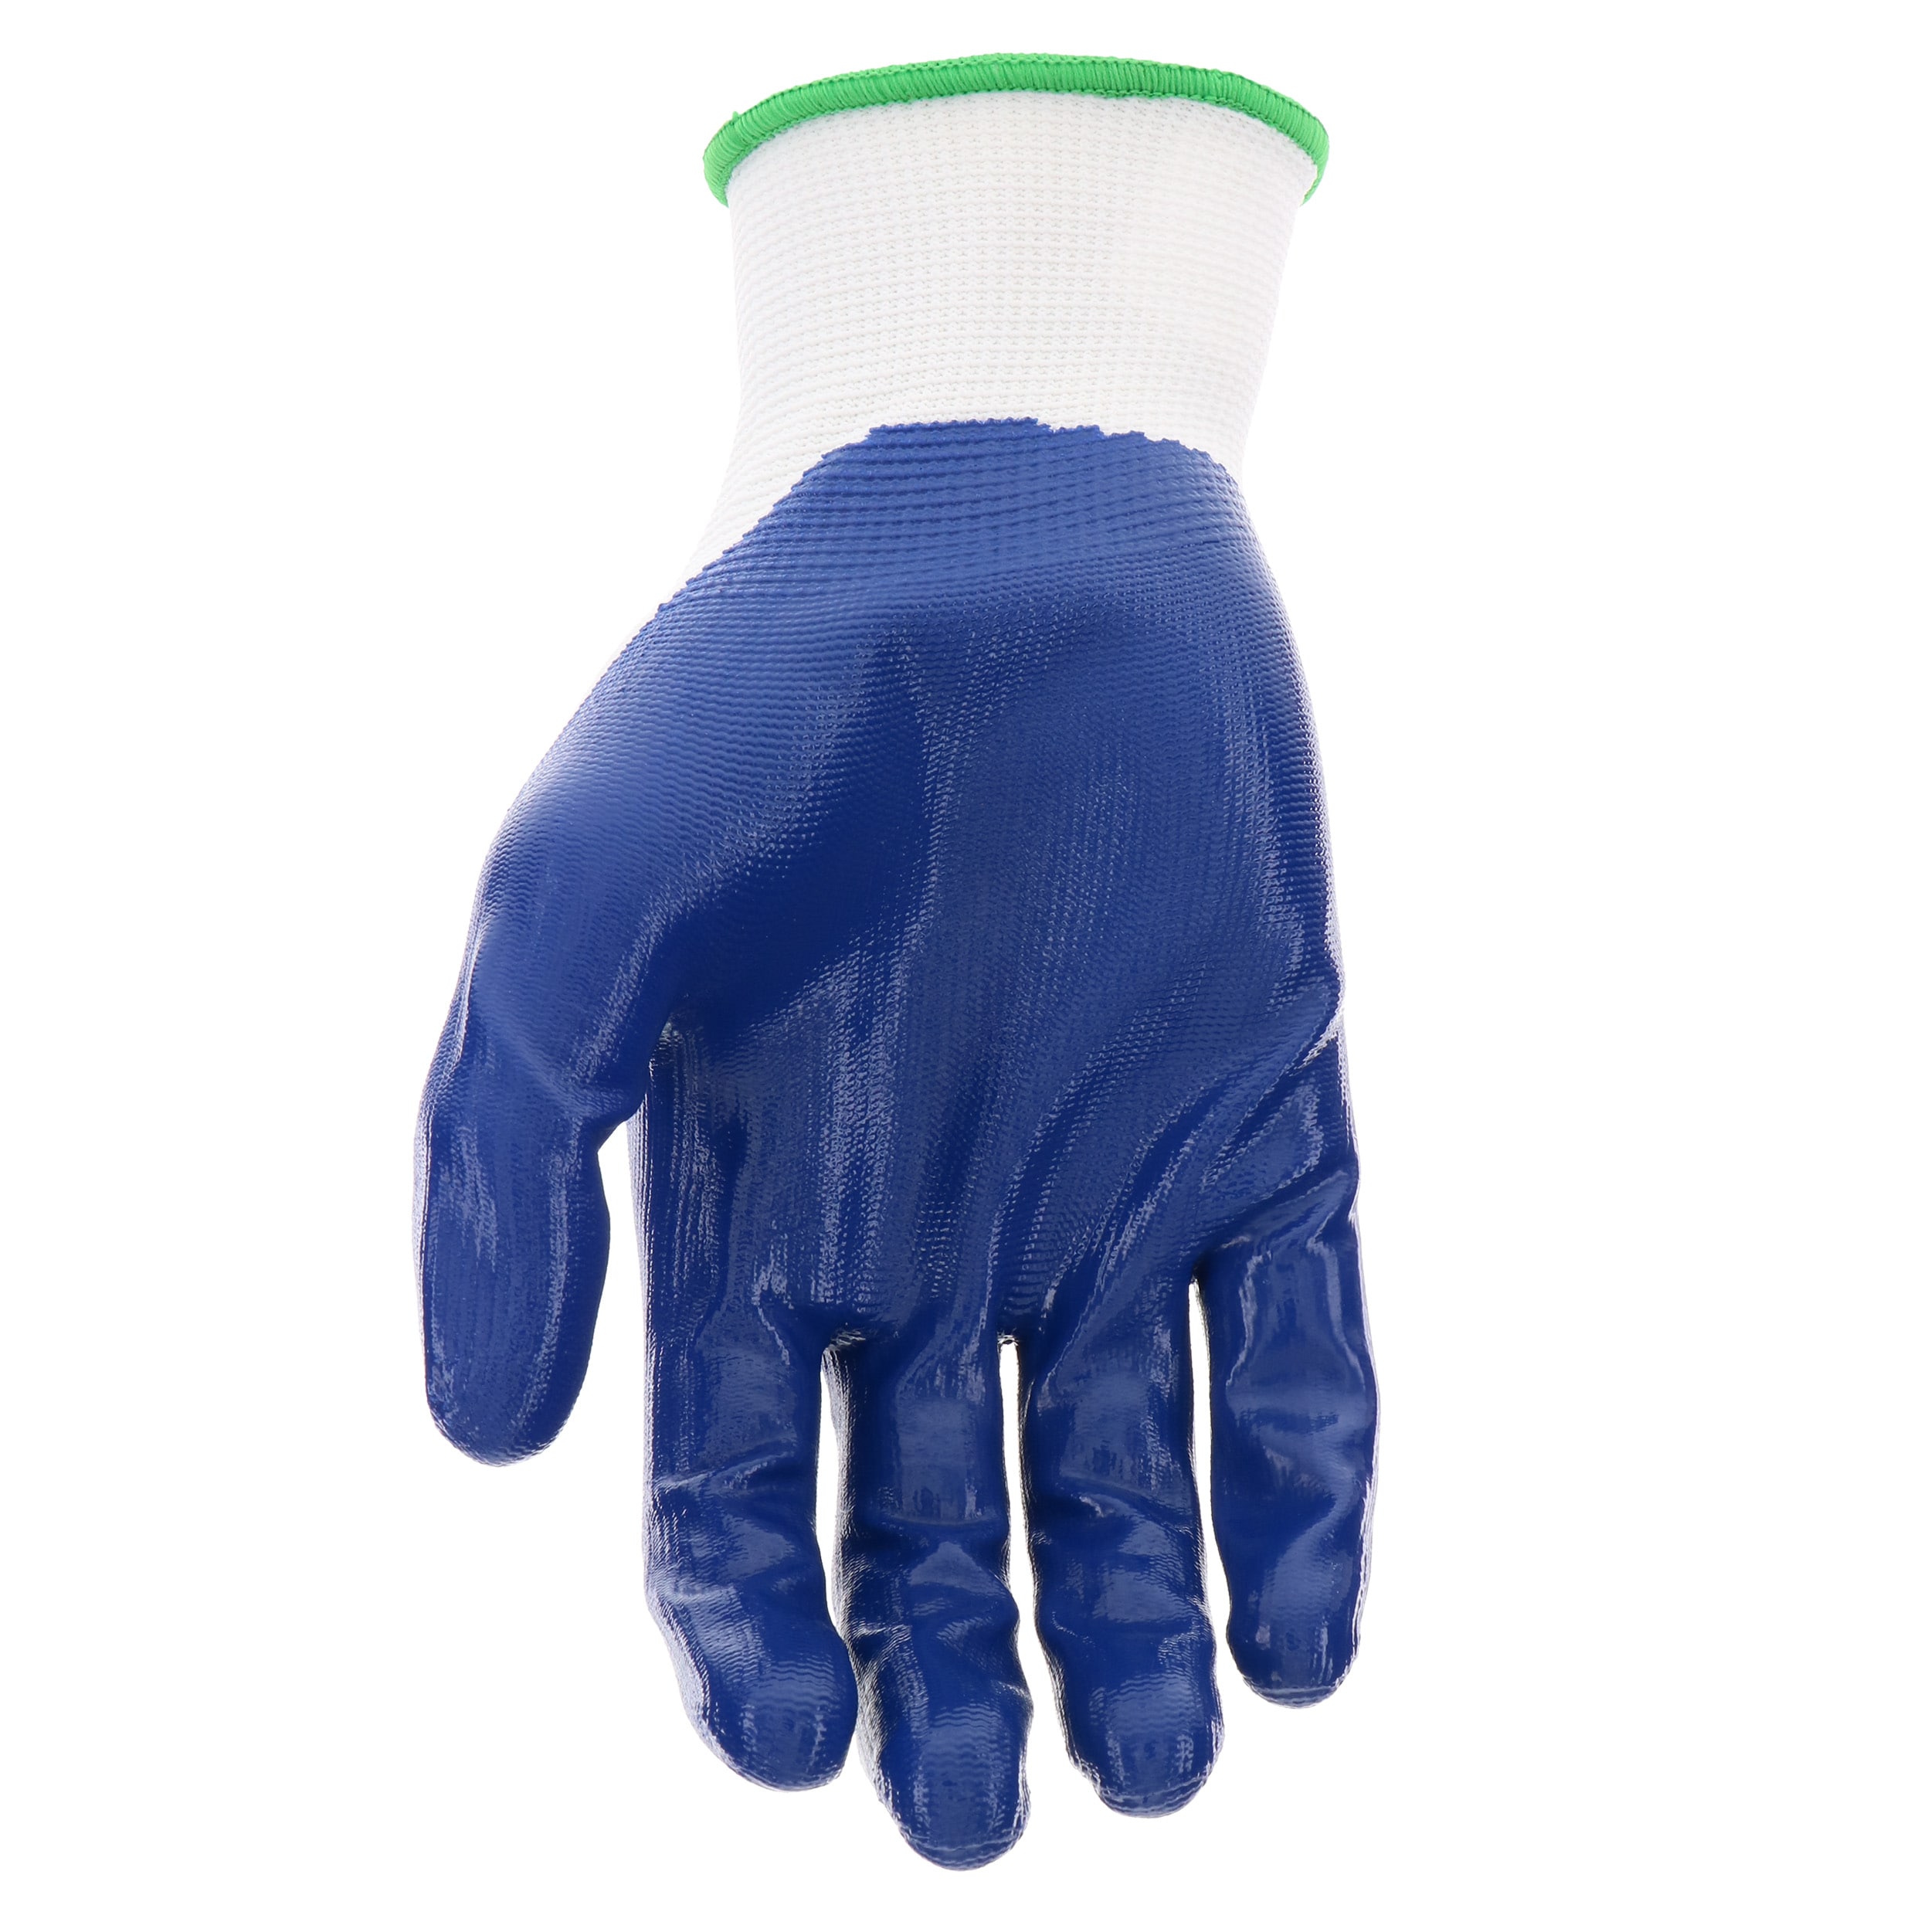 12 Pairs Nitrile Coated Knit Polyester Work Gloves Large size 